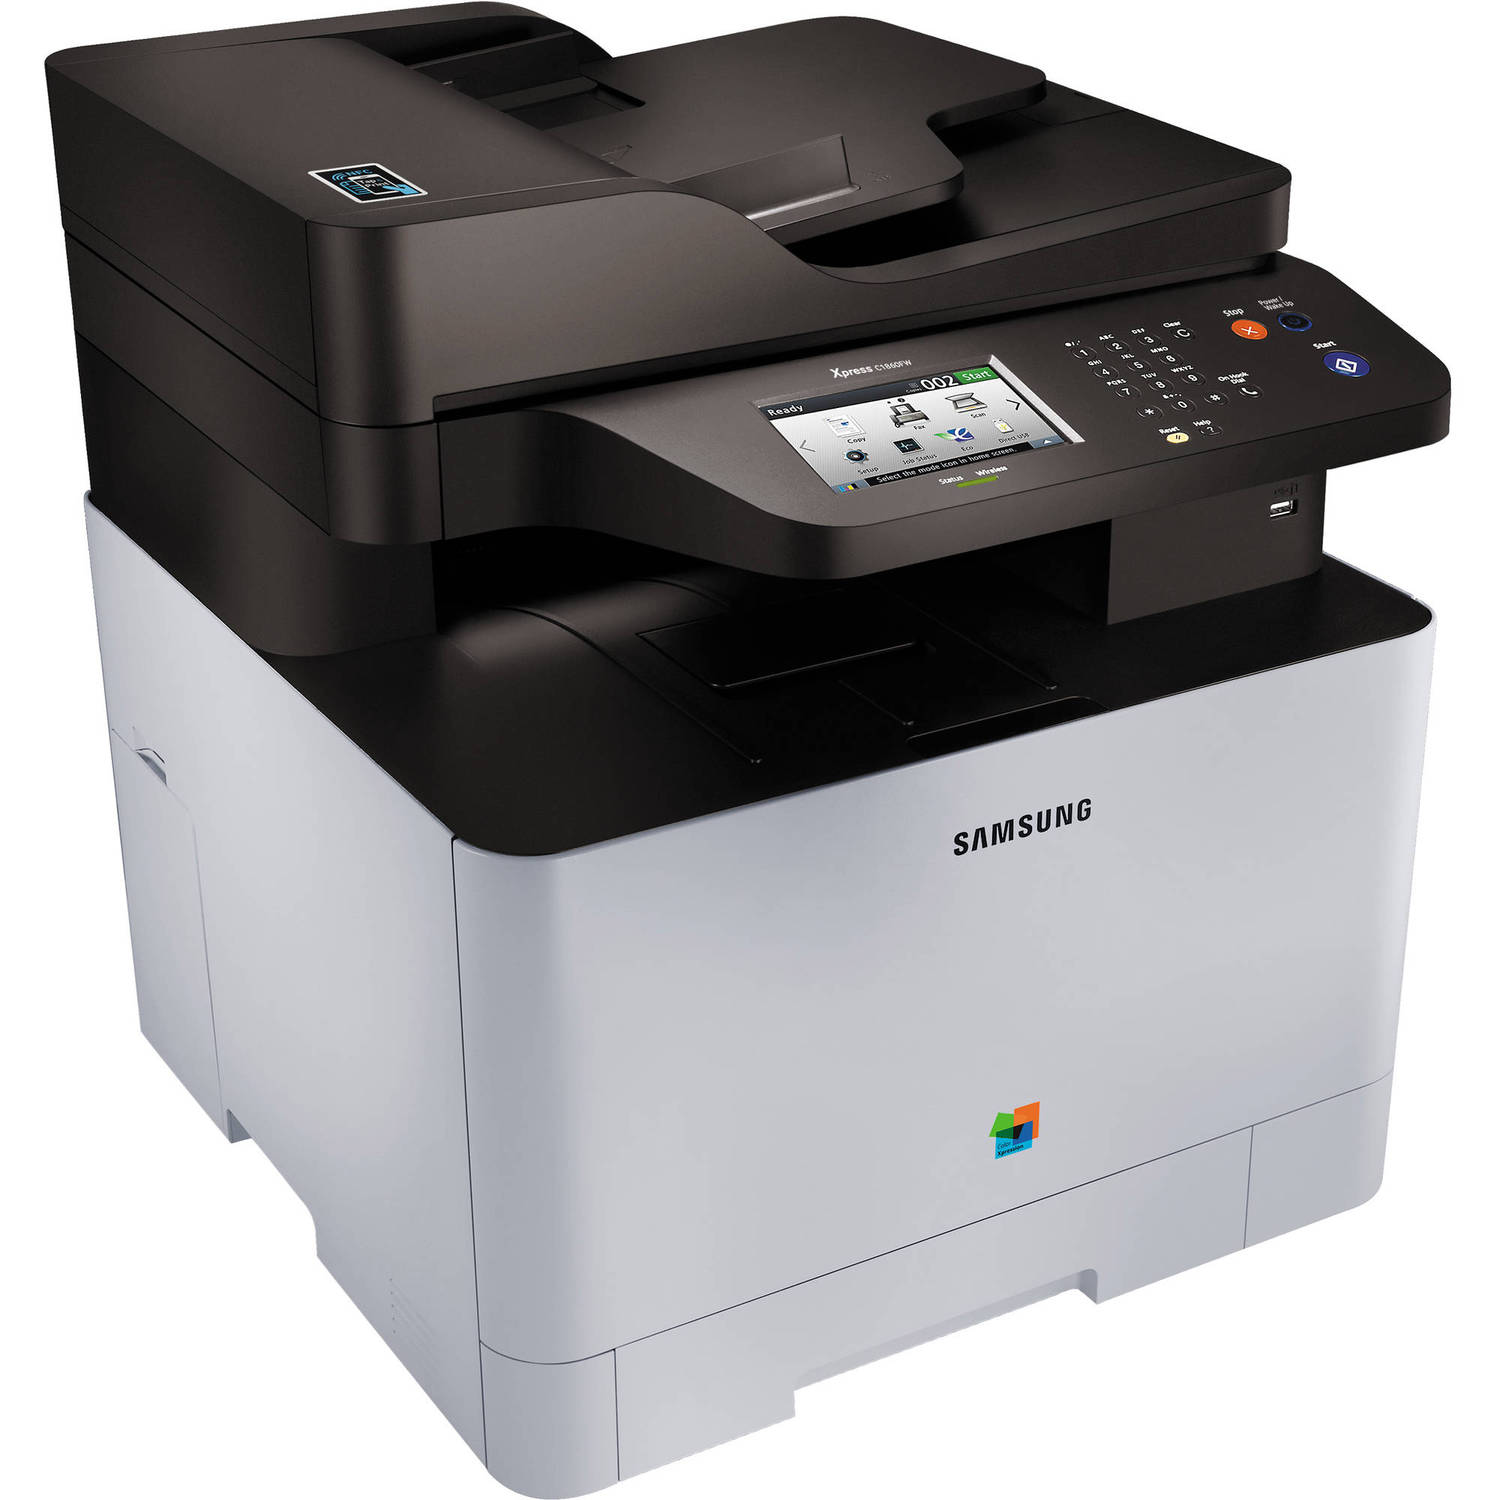 Samsung SLC1860FW/XBH Color All-in-one Laser Printer